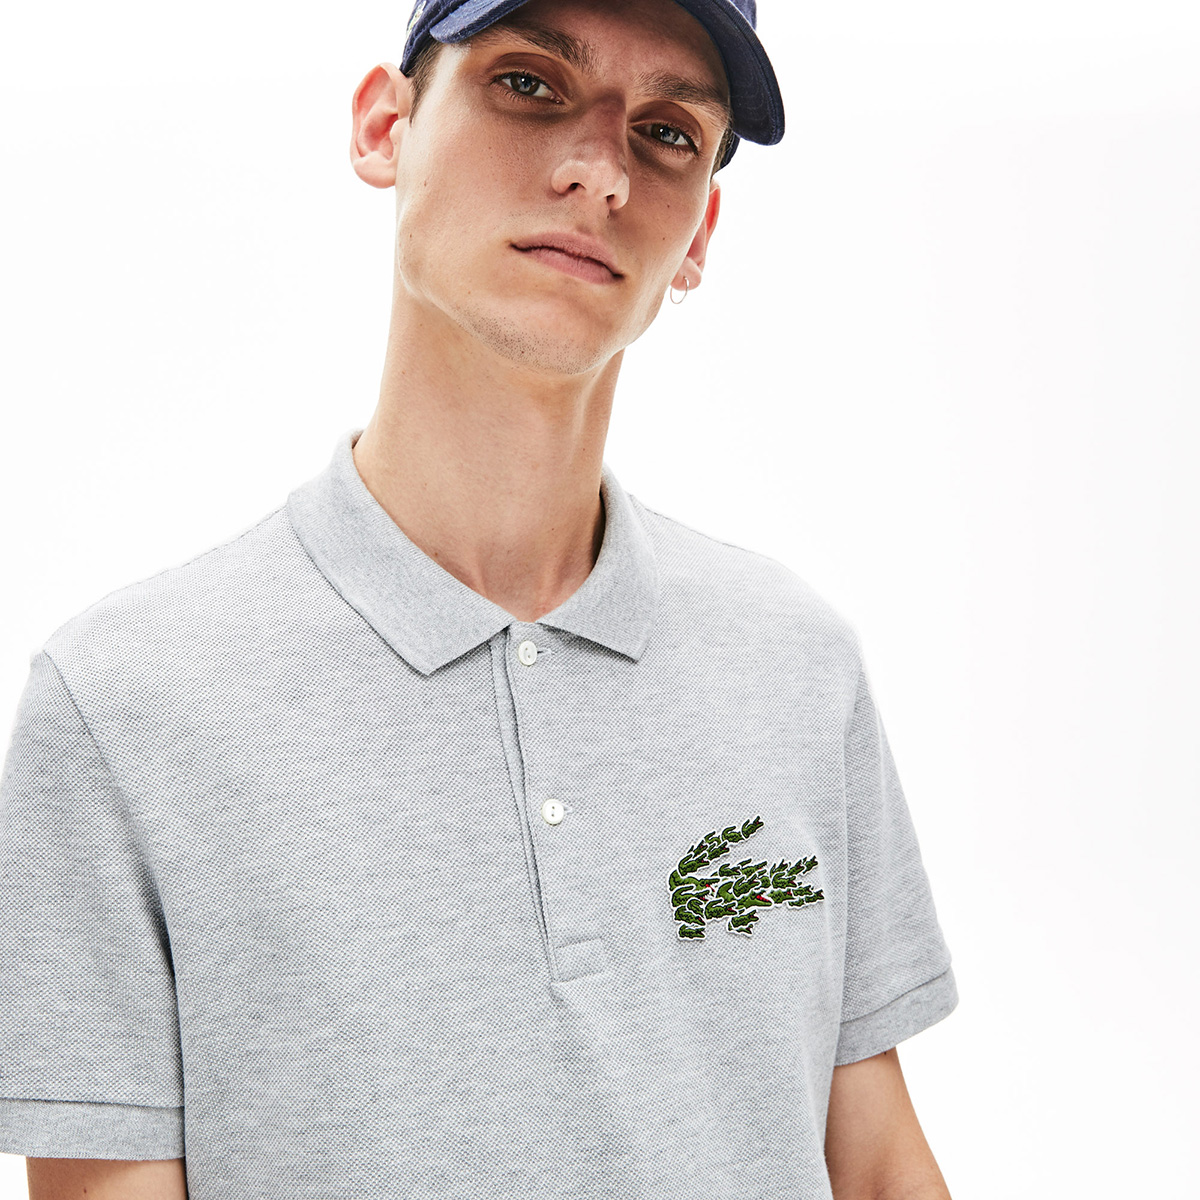 Lacoste Debuts New 